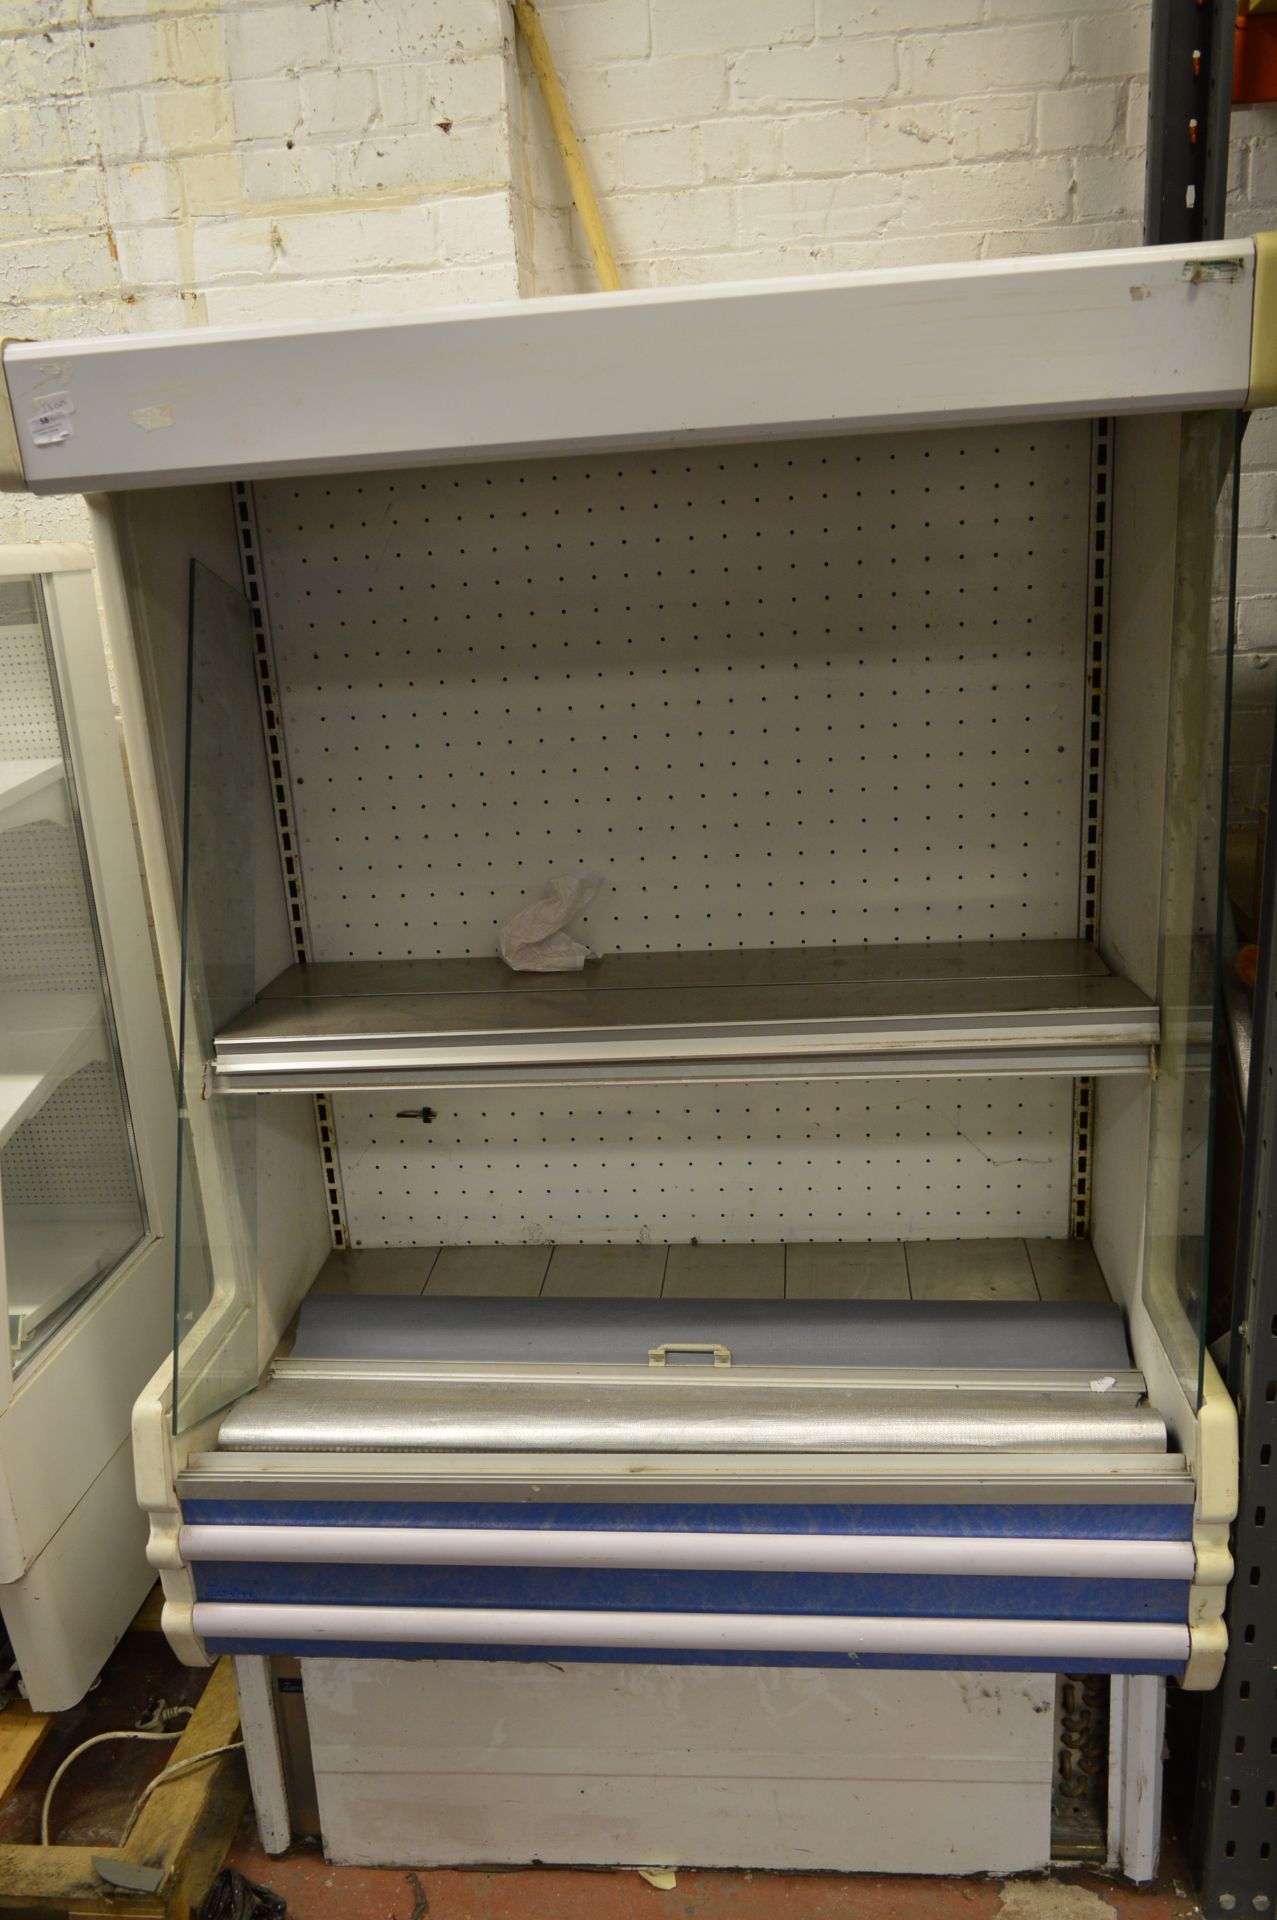 Open Fronted Multideck Chilled Display Unit